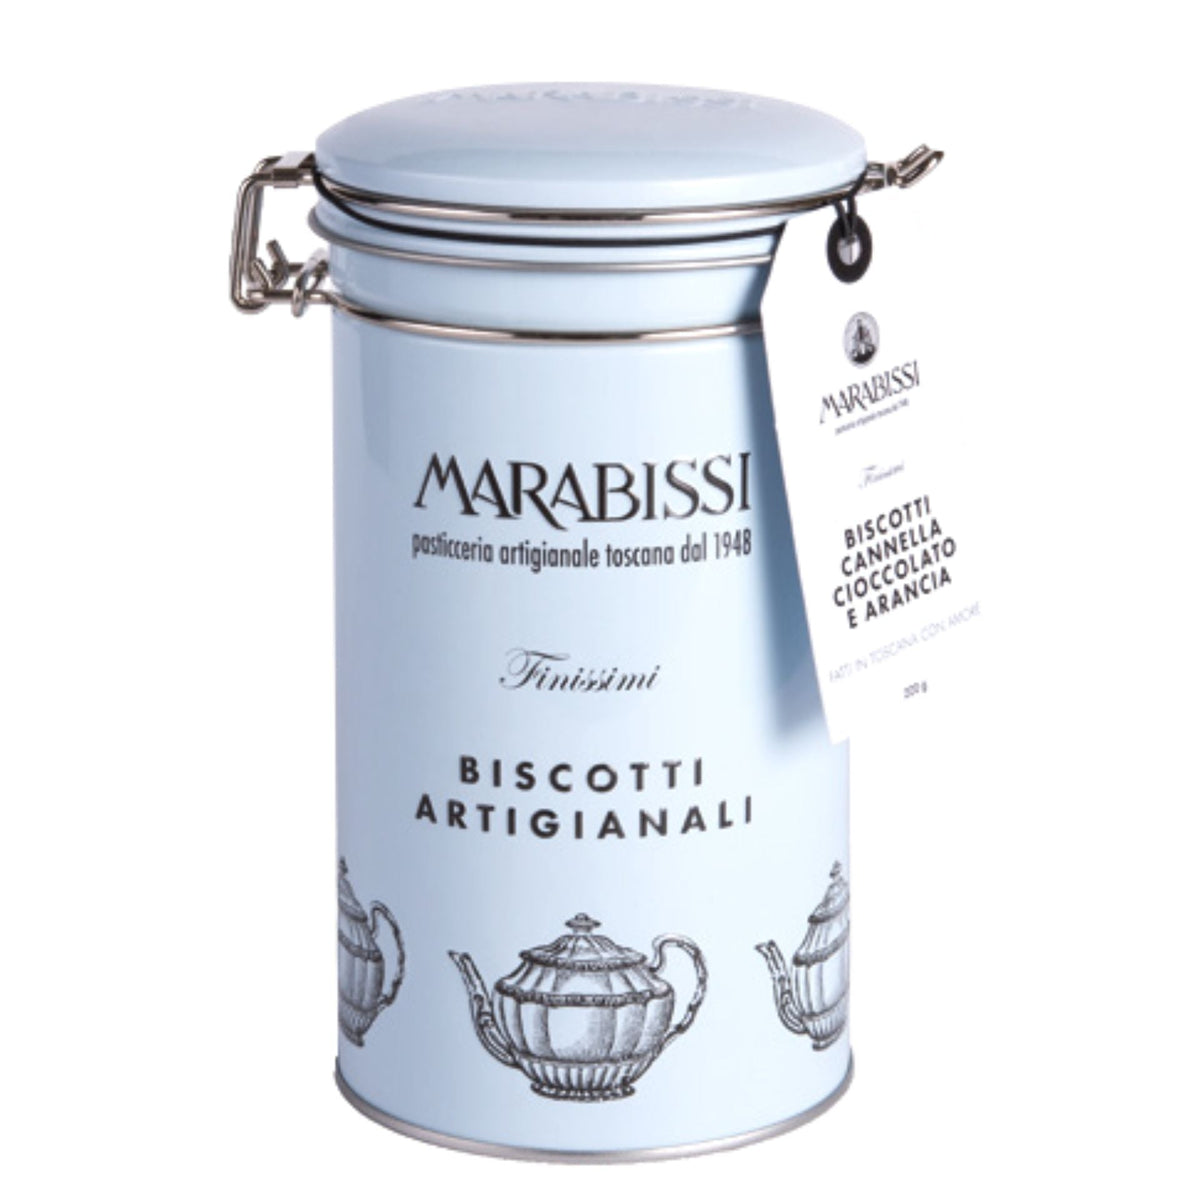 Marabissi Chocolate, Cinnamon &amp; Orange Artisan Biscuits (Tin) 200g  | Imported and distributed in the UK by Just Gourmet Foods